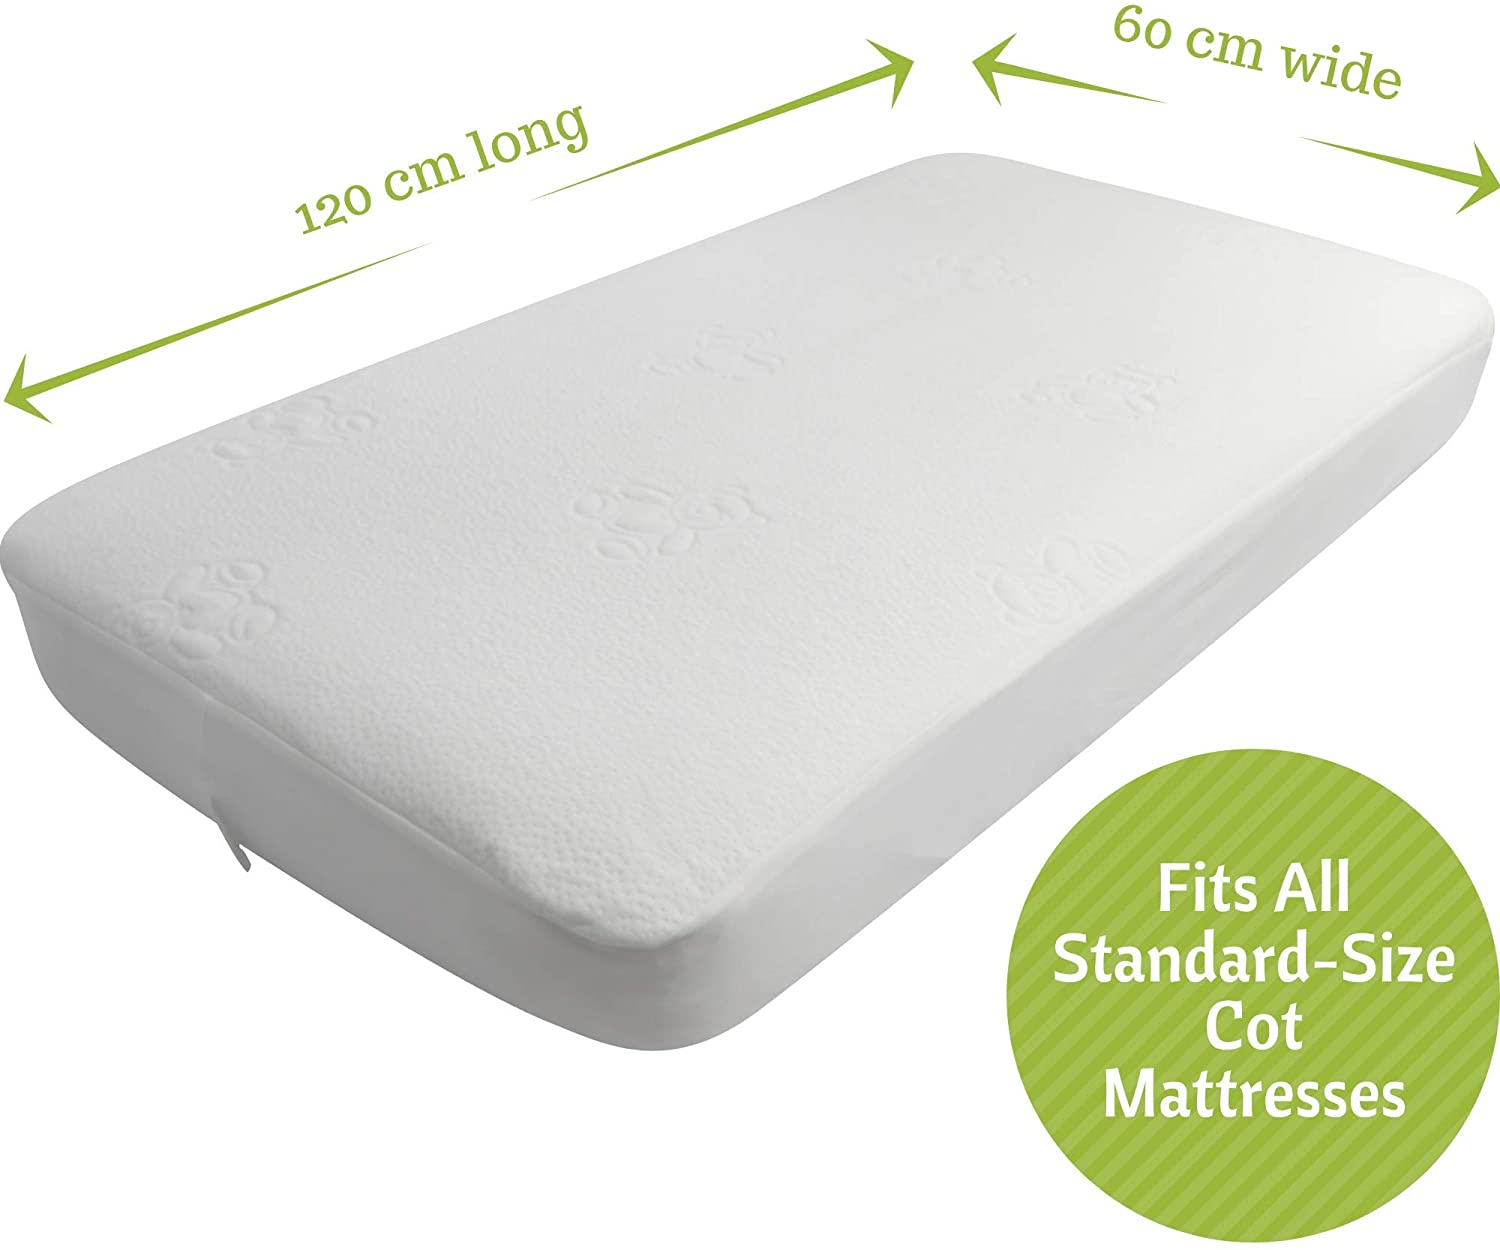 waterproof cover for cot mattress